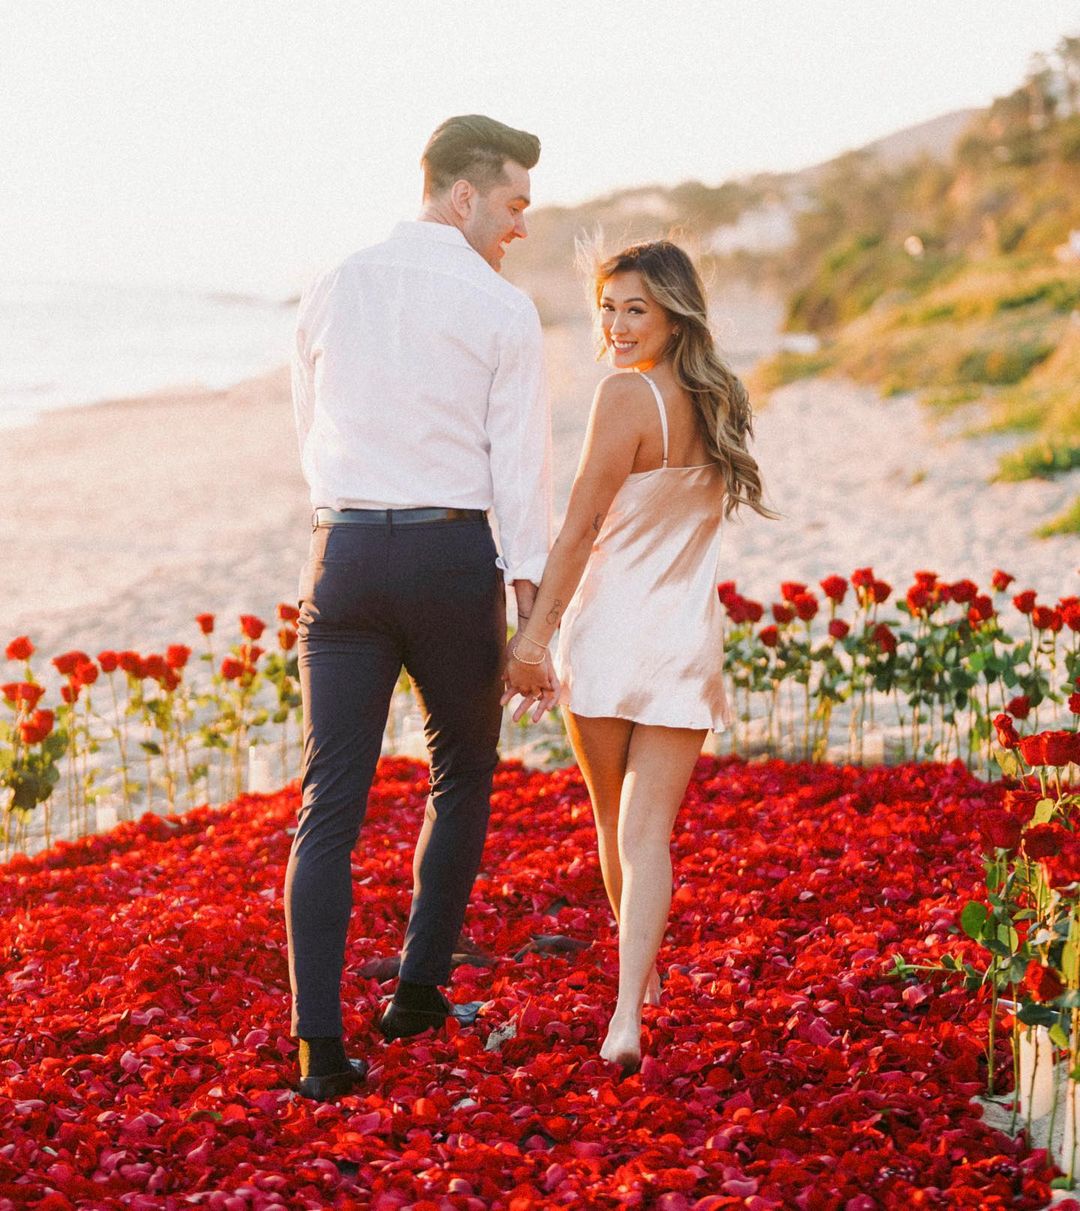 LaurDIY is engaged to her boyfriend, Jeremy Lewis, and she shared her proposal on Instagram.